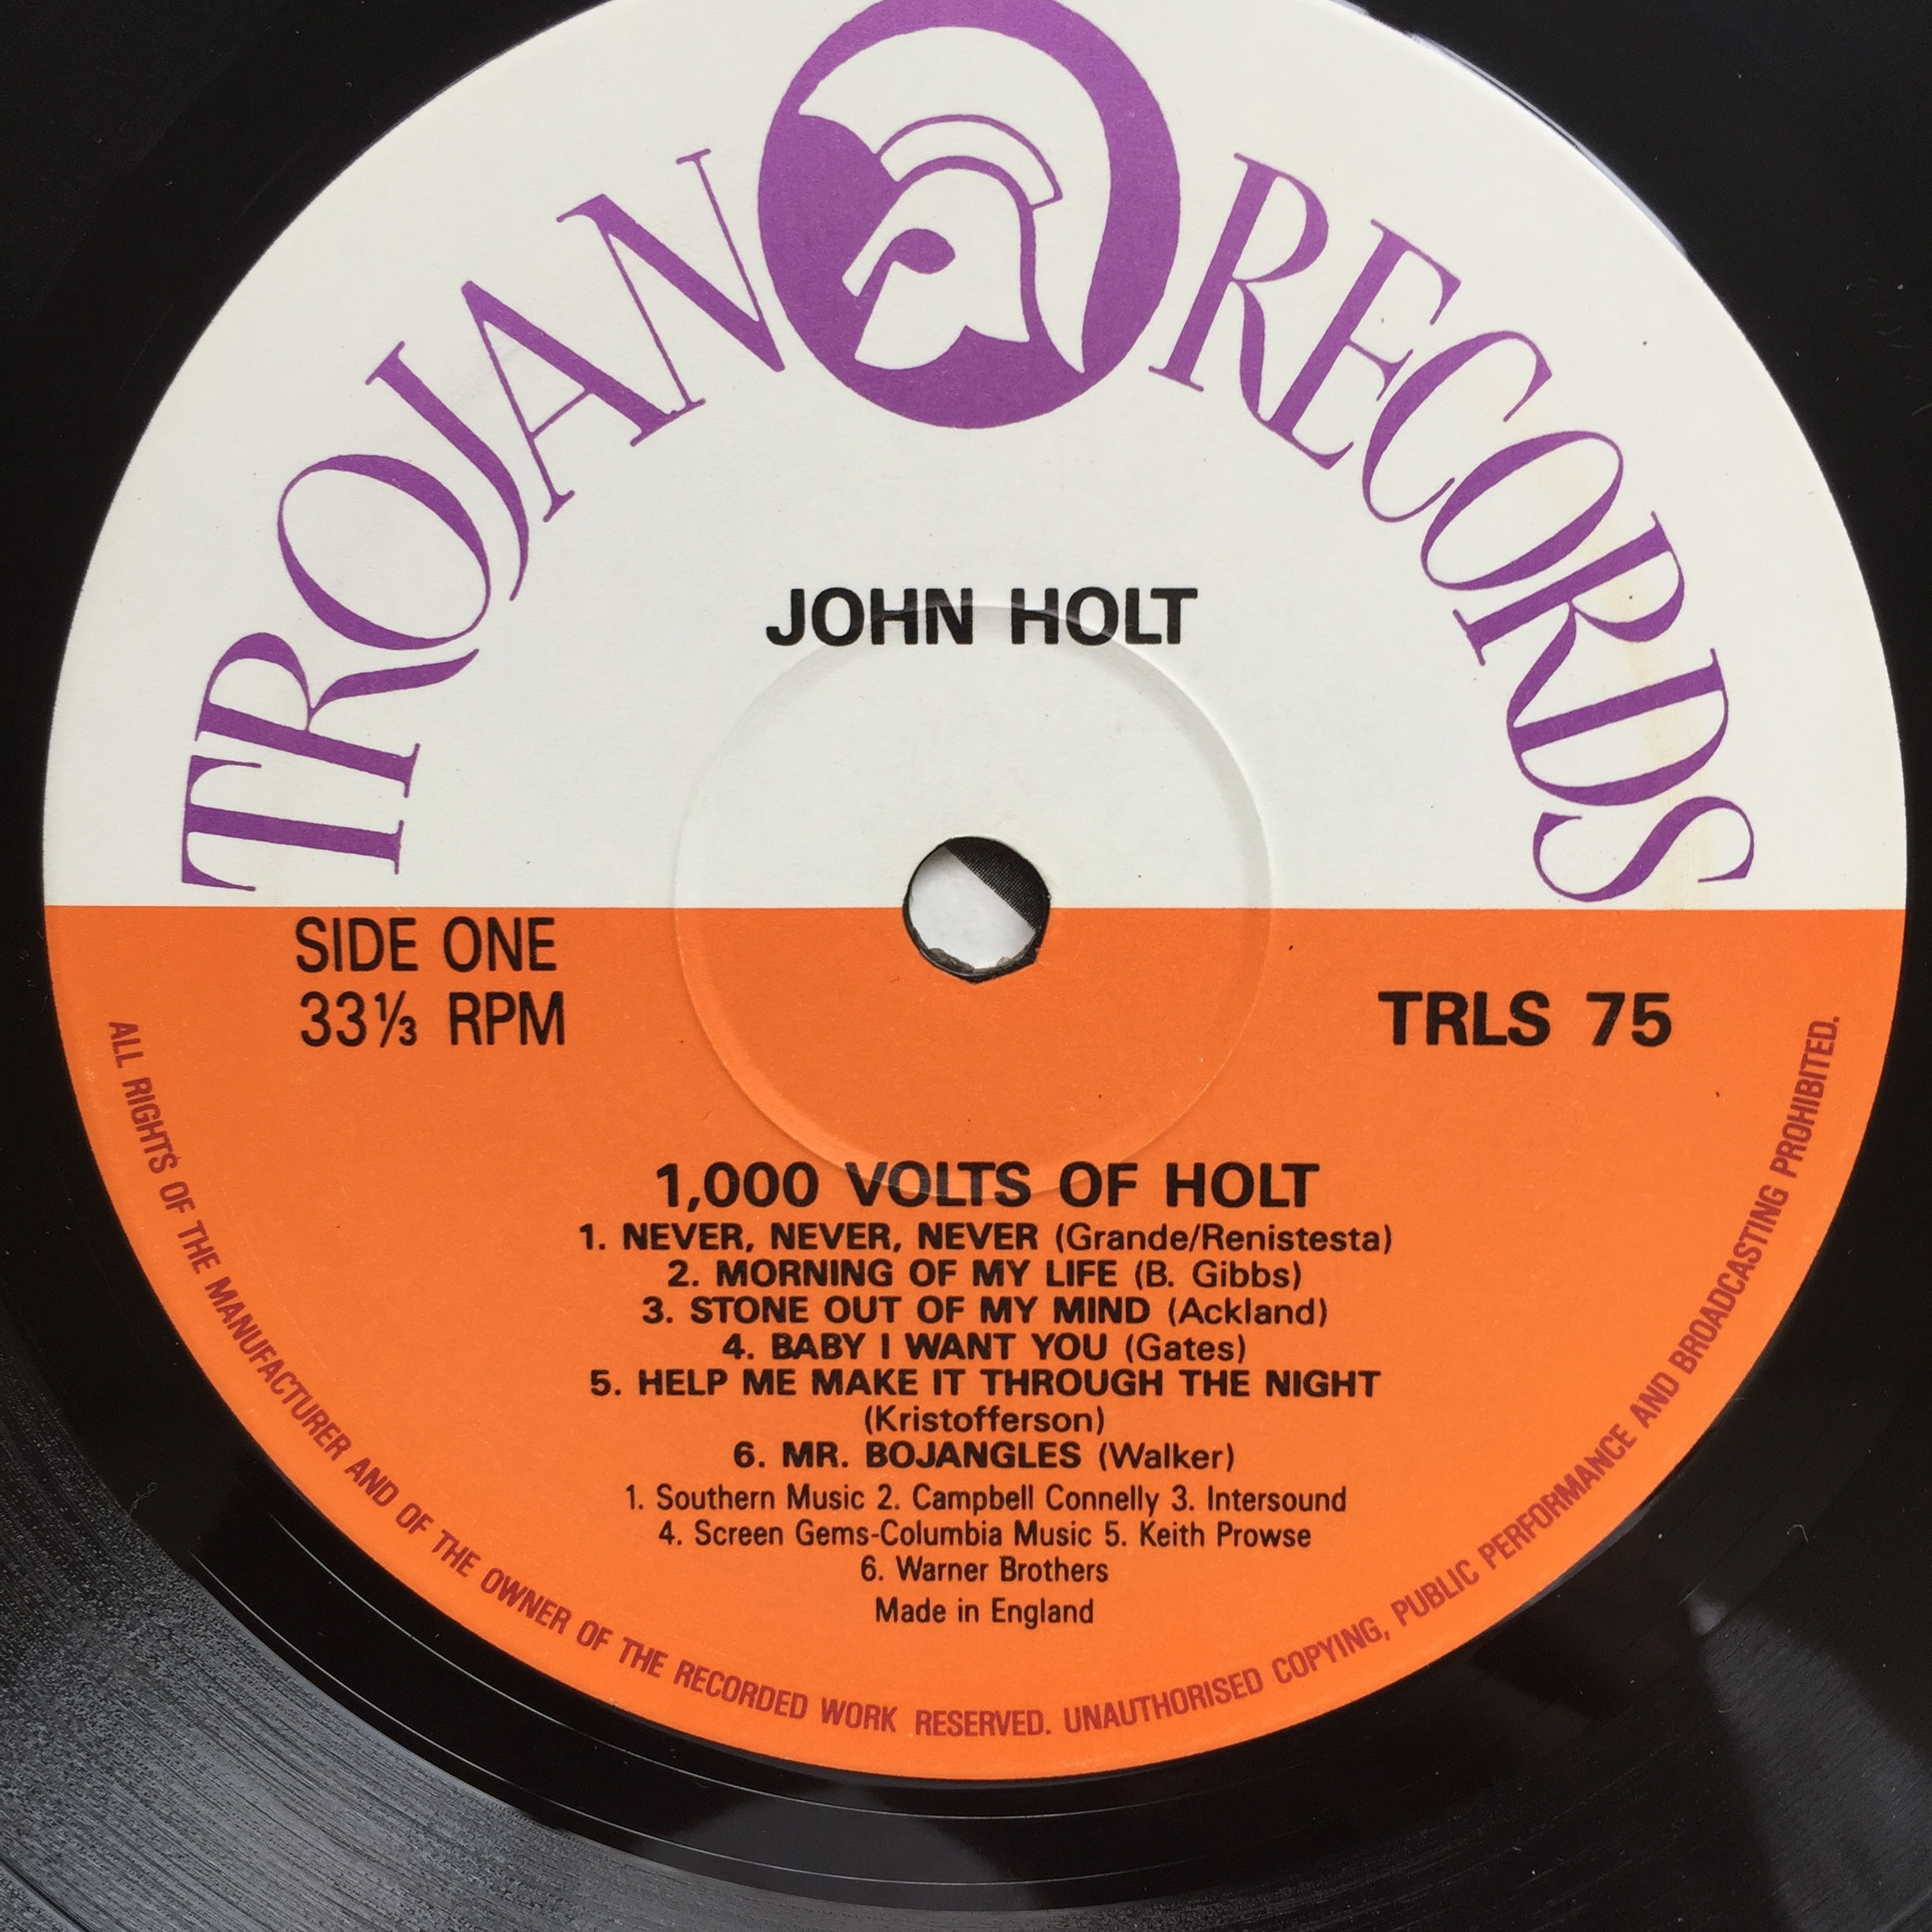 100 volts of holt